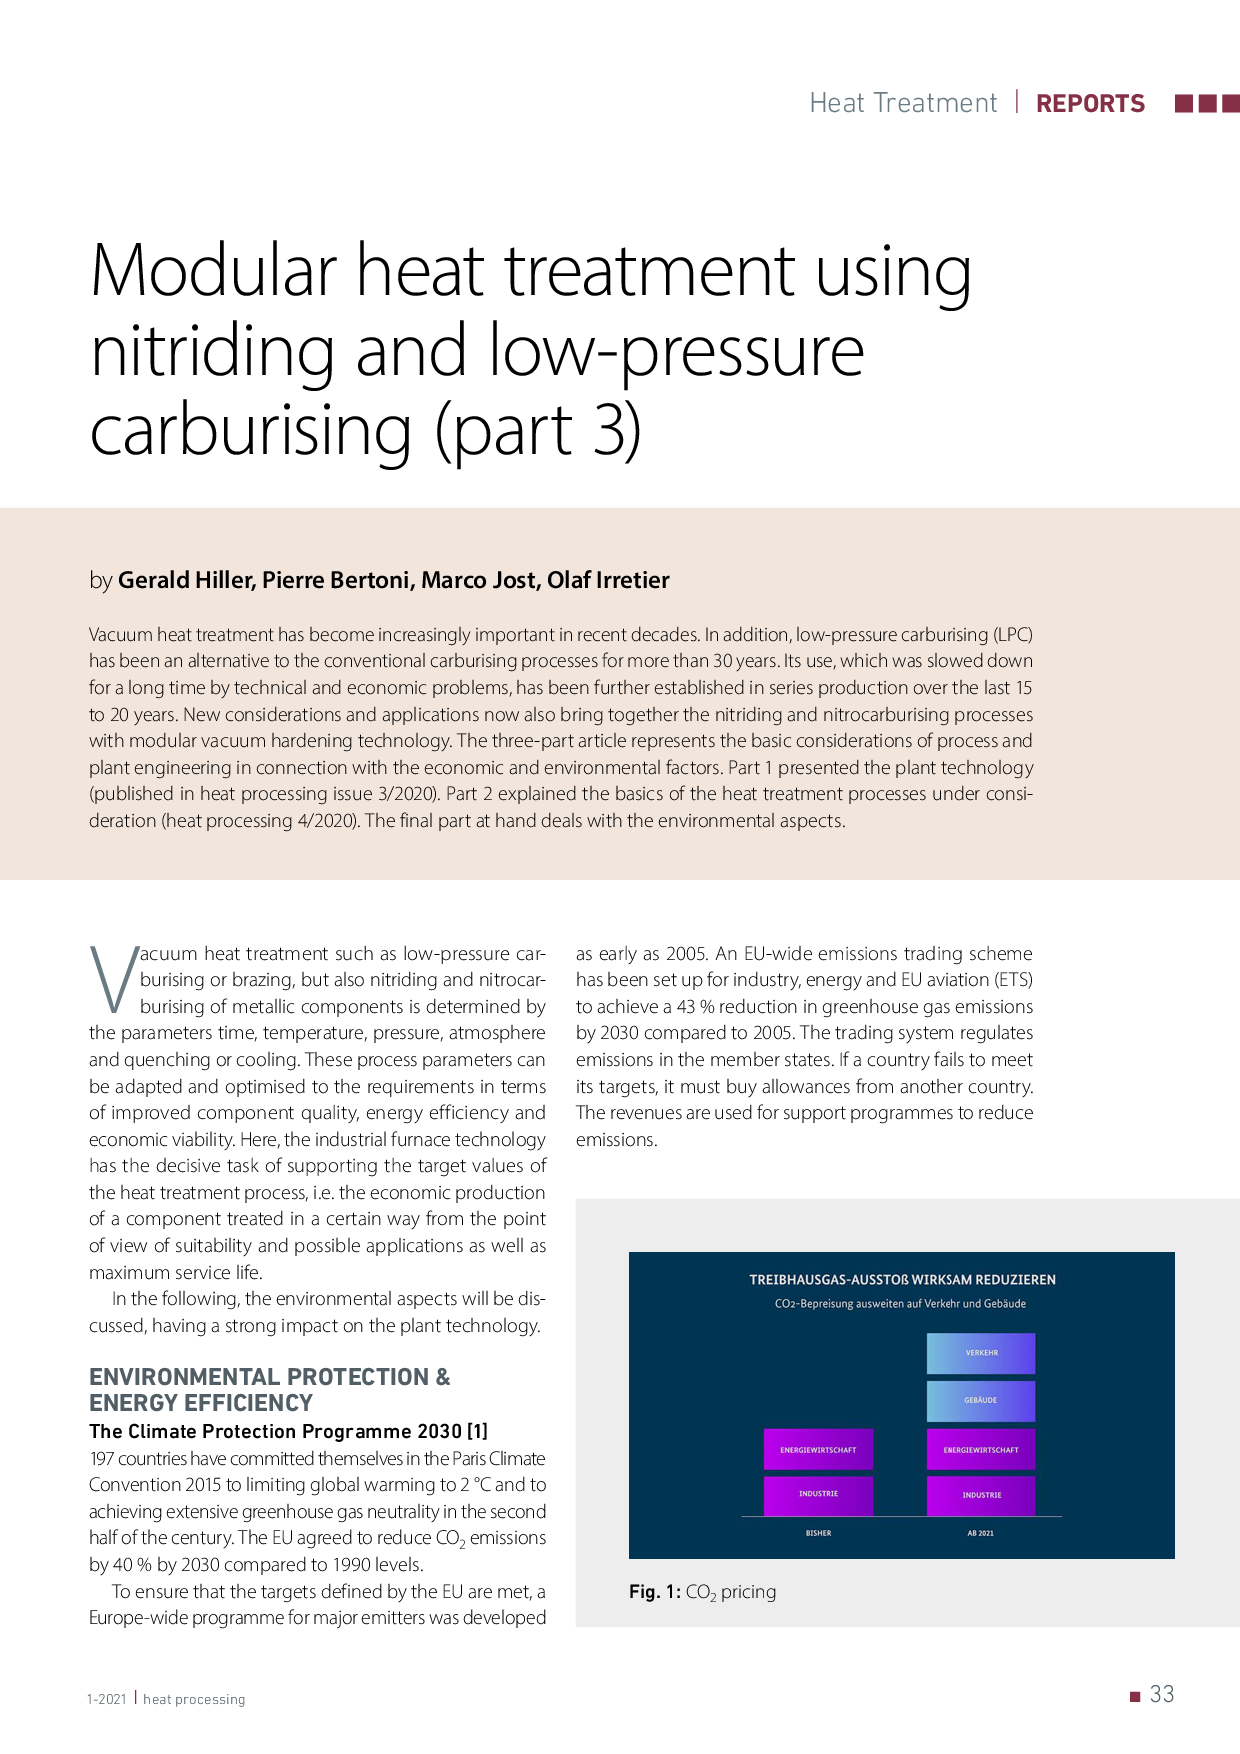 Modular heat treatment using nitriding and low-pressure carburising (part 3)